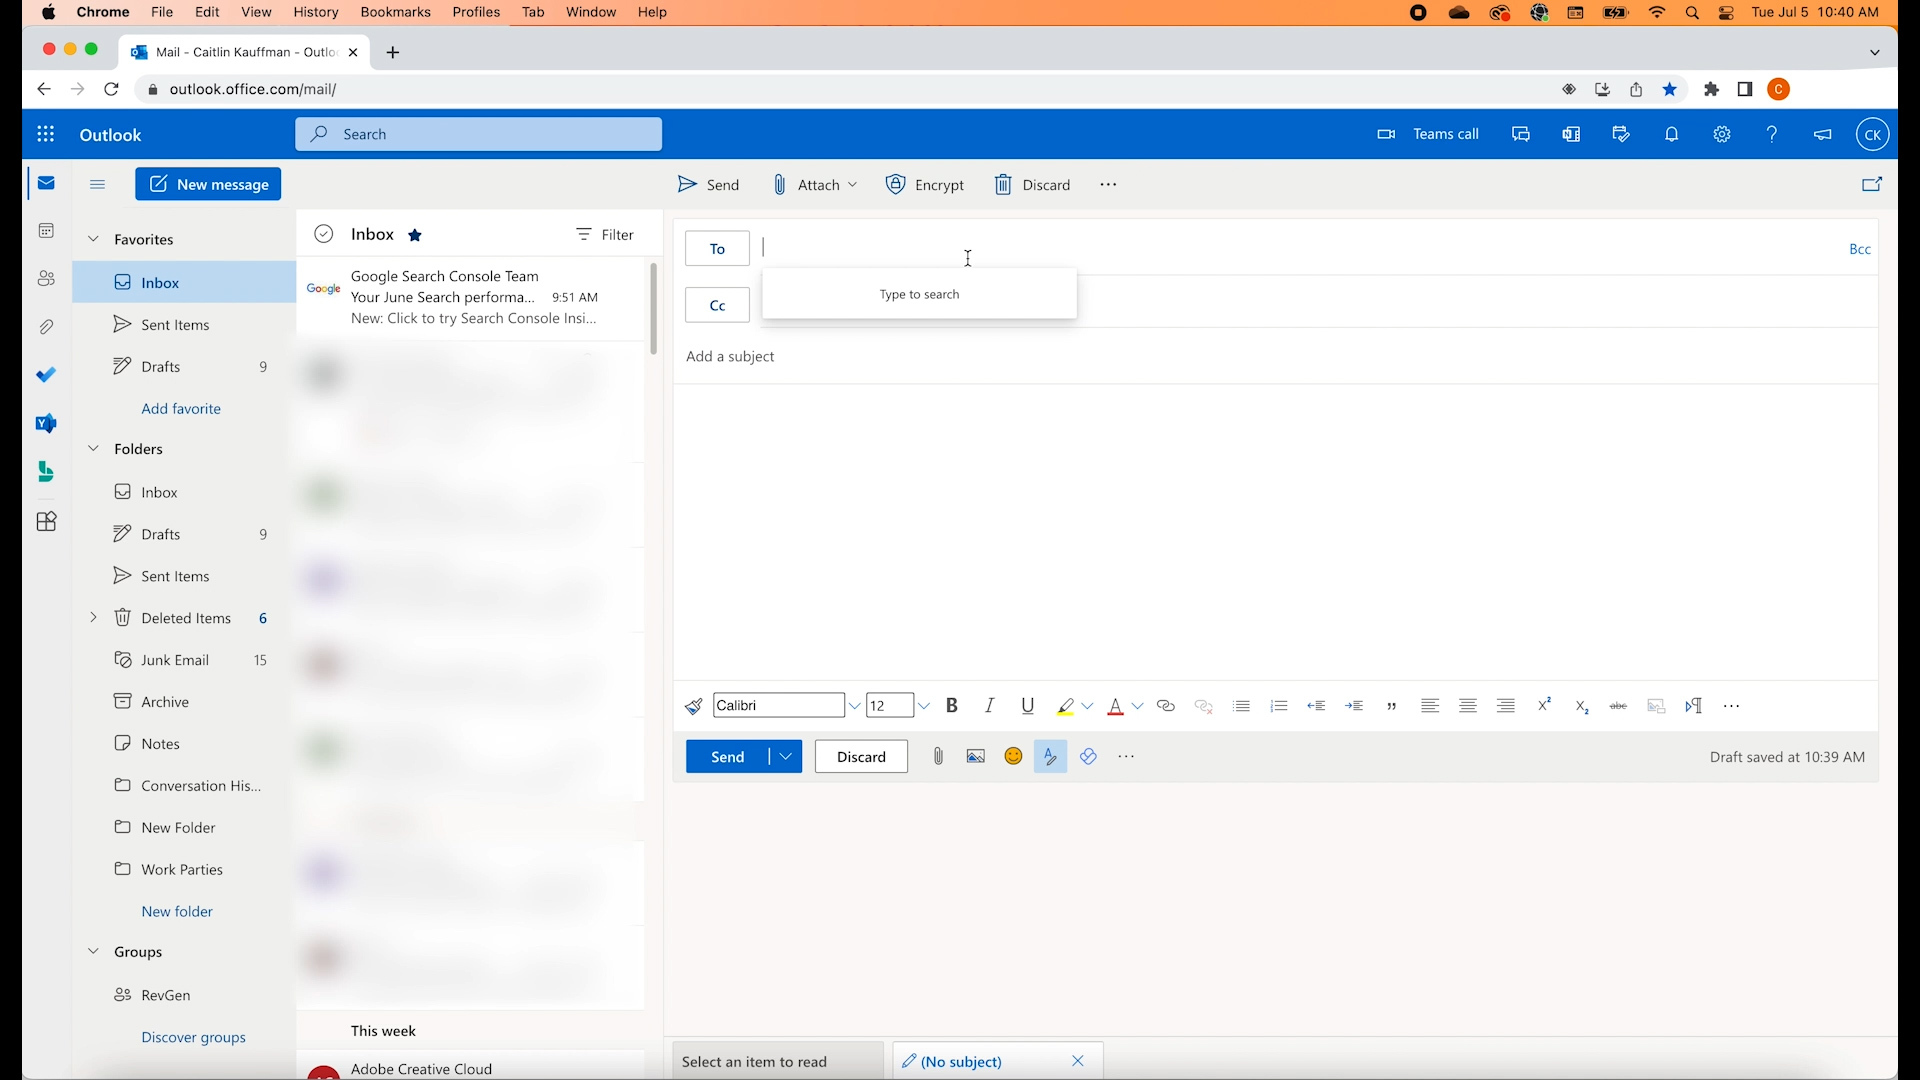 How to Send a Message in Outlook 2